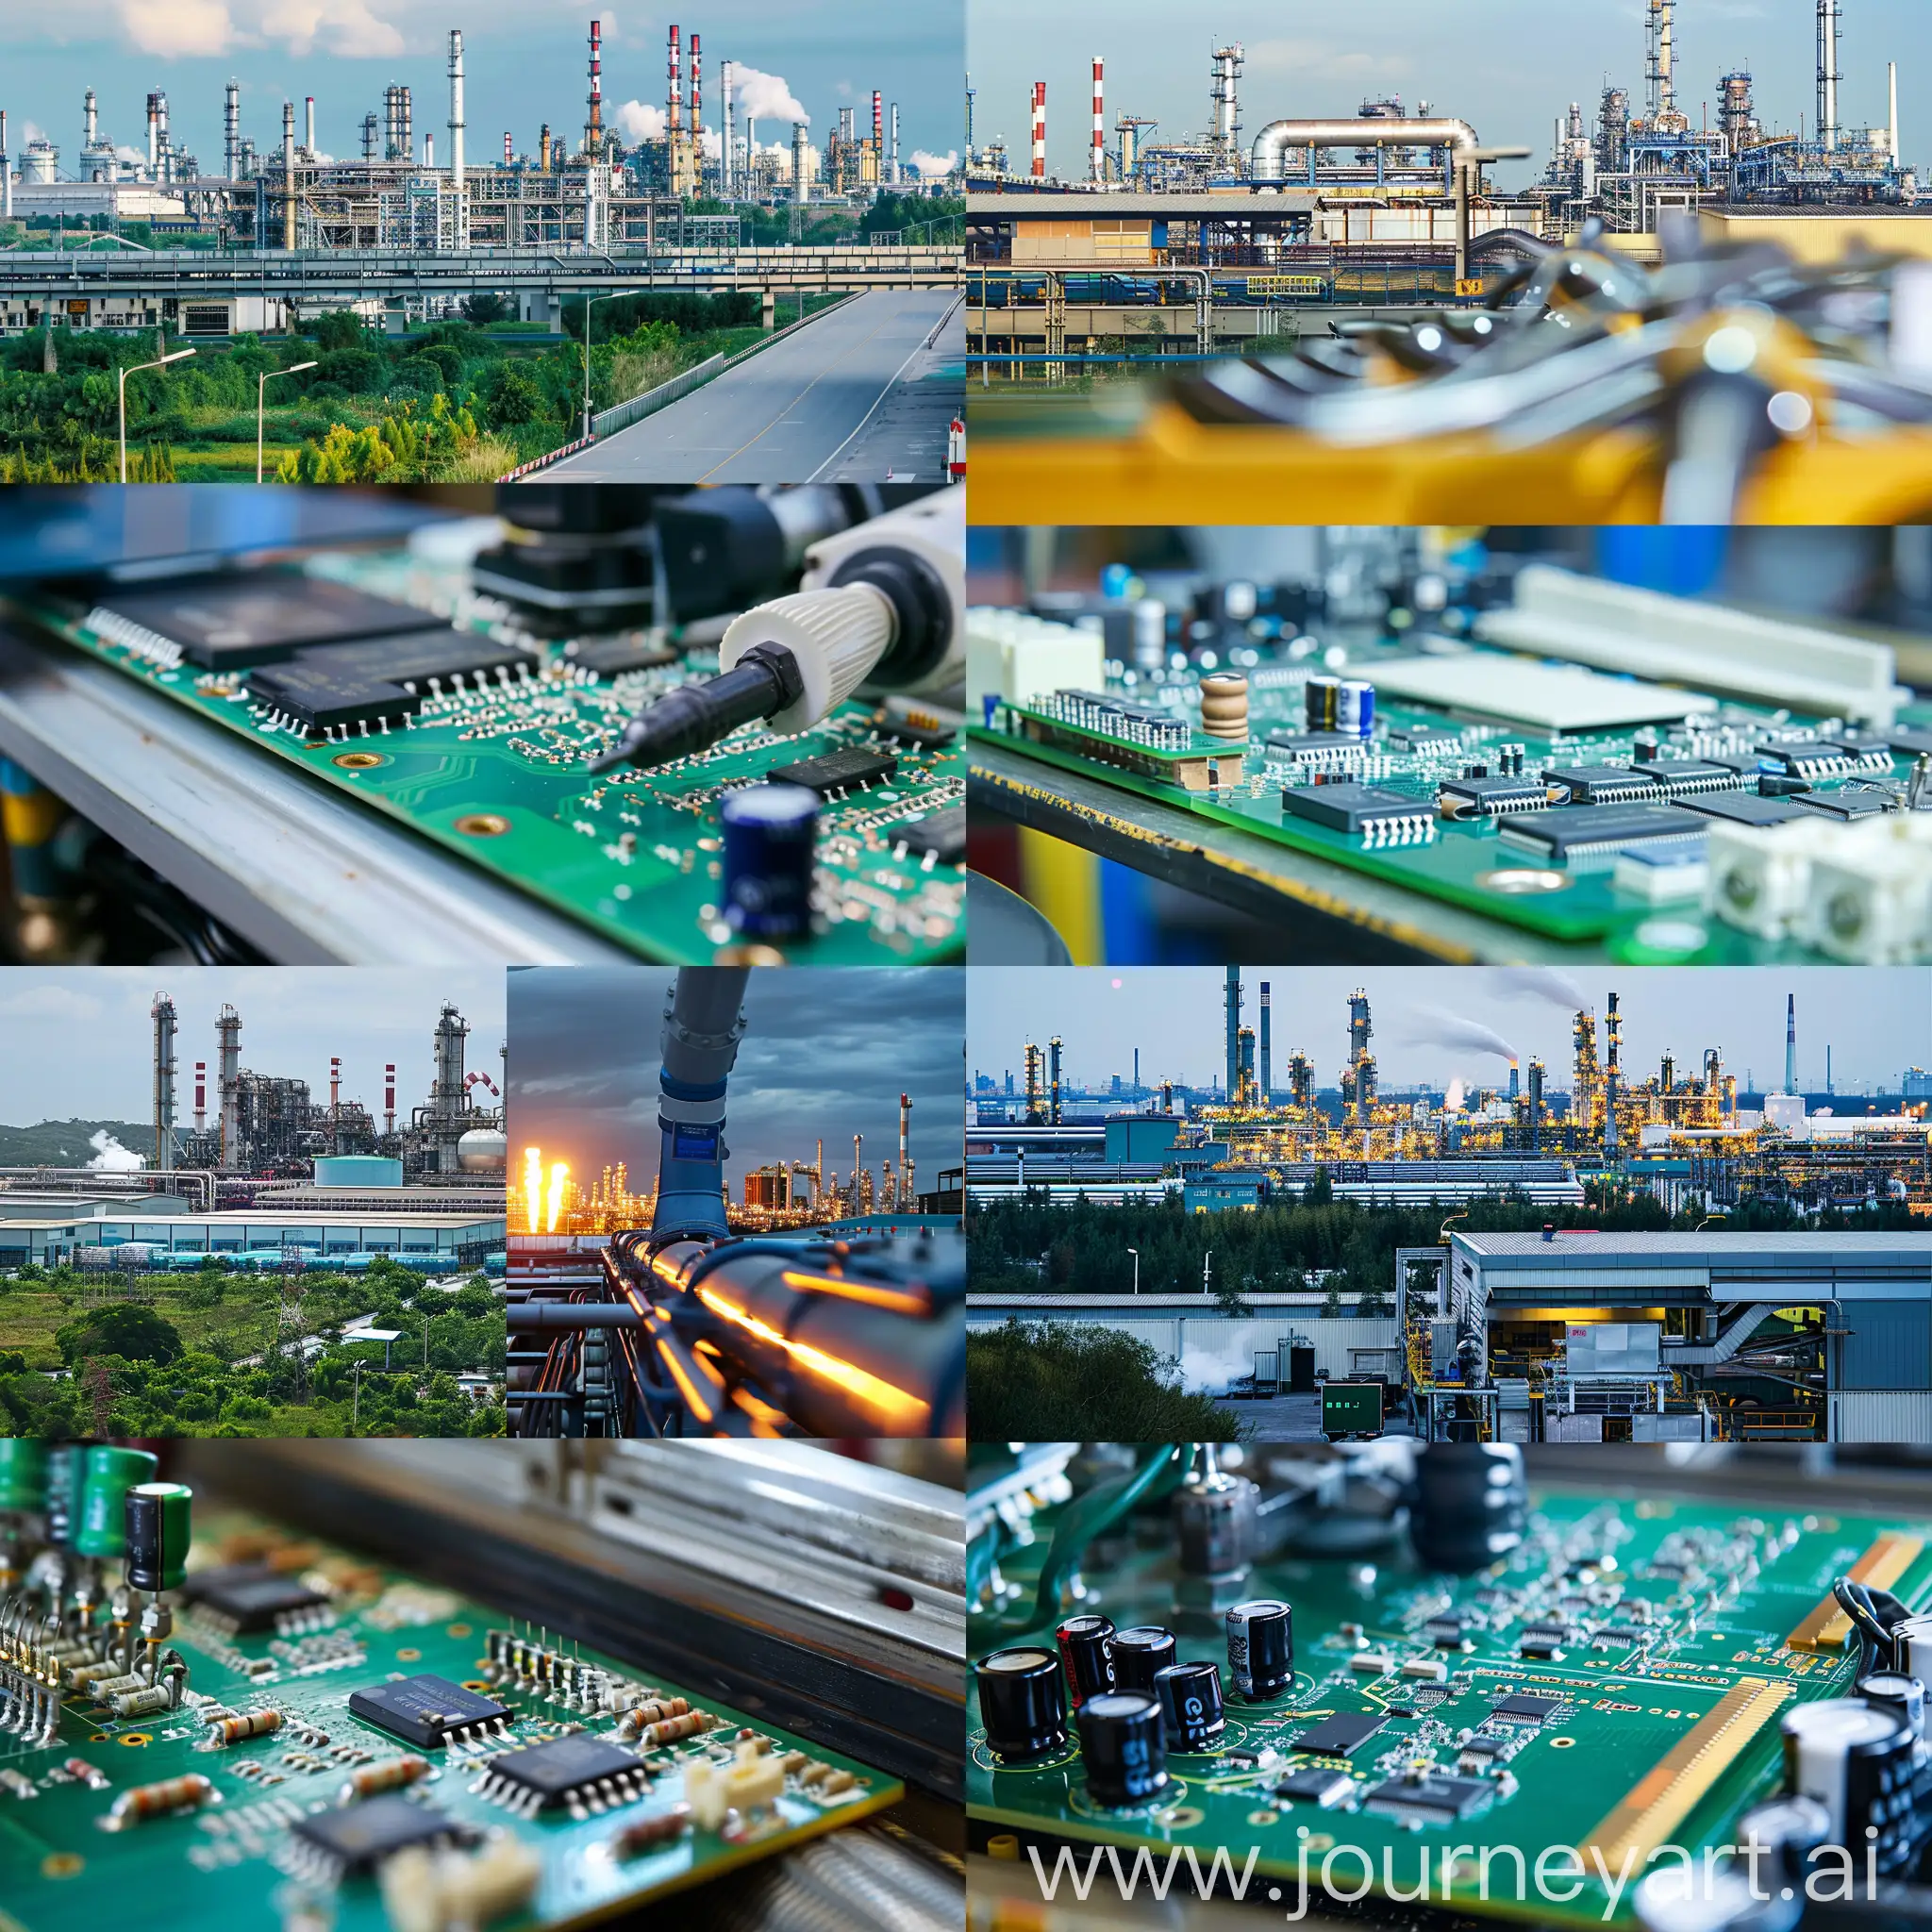 Gas-Detection-Production-Company-Electronic-Board-Manufacturing-Workshop-with-Refinery-Background